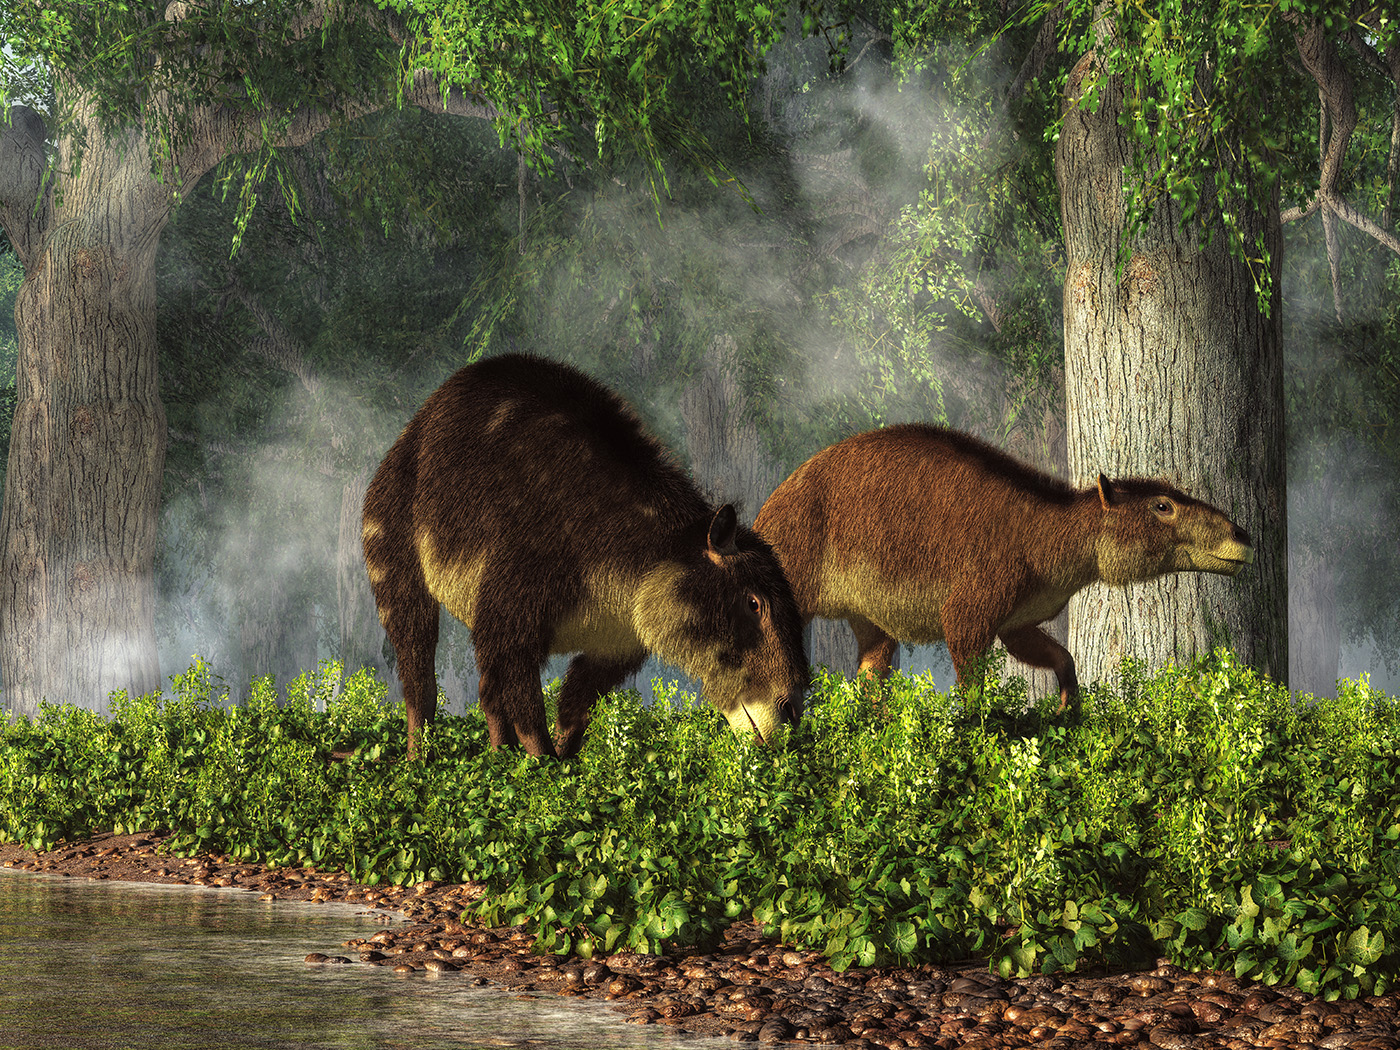 A 3-D rendering of two extinct, furry animals with hooves eating lush green vegetation in an ancient forest.